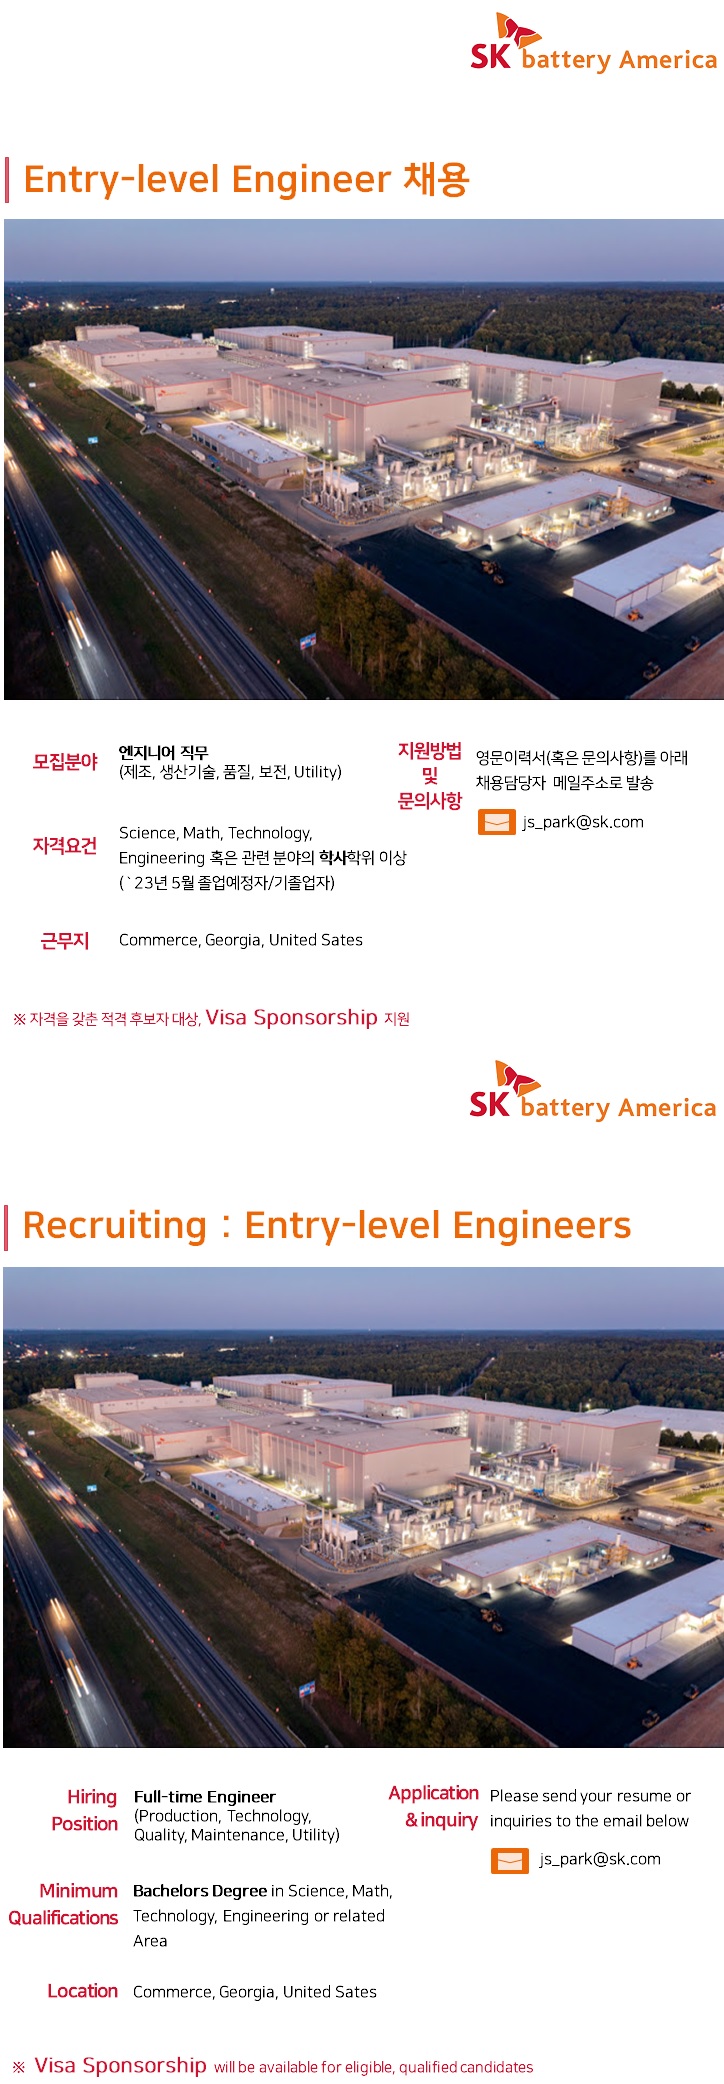 SK Battery America_Recruiting_Entry-level Engineers.jpg